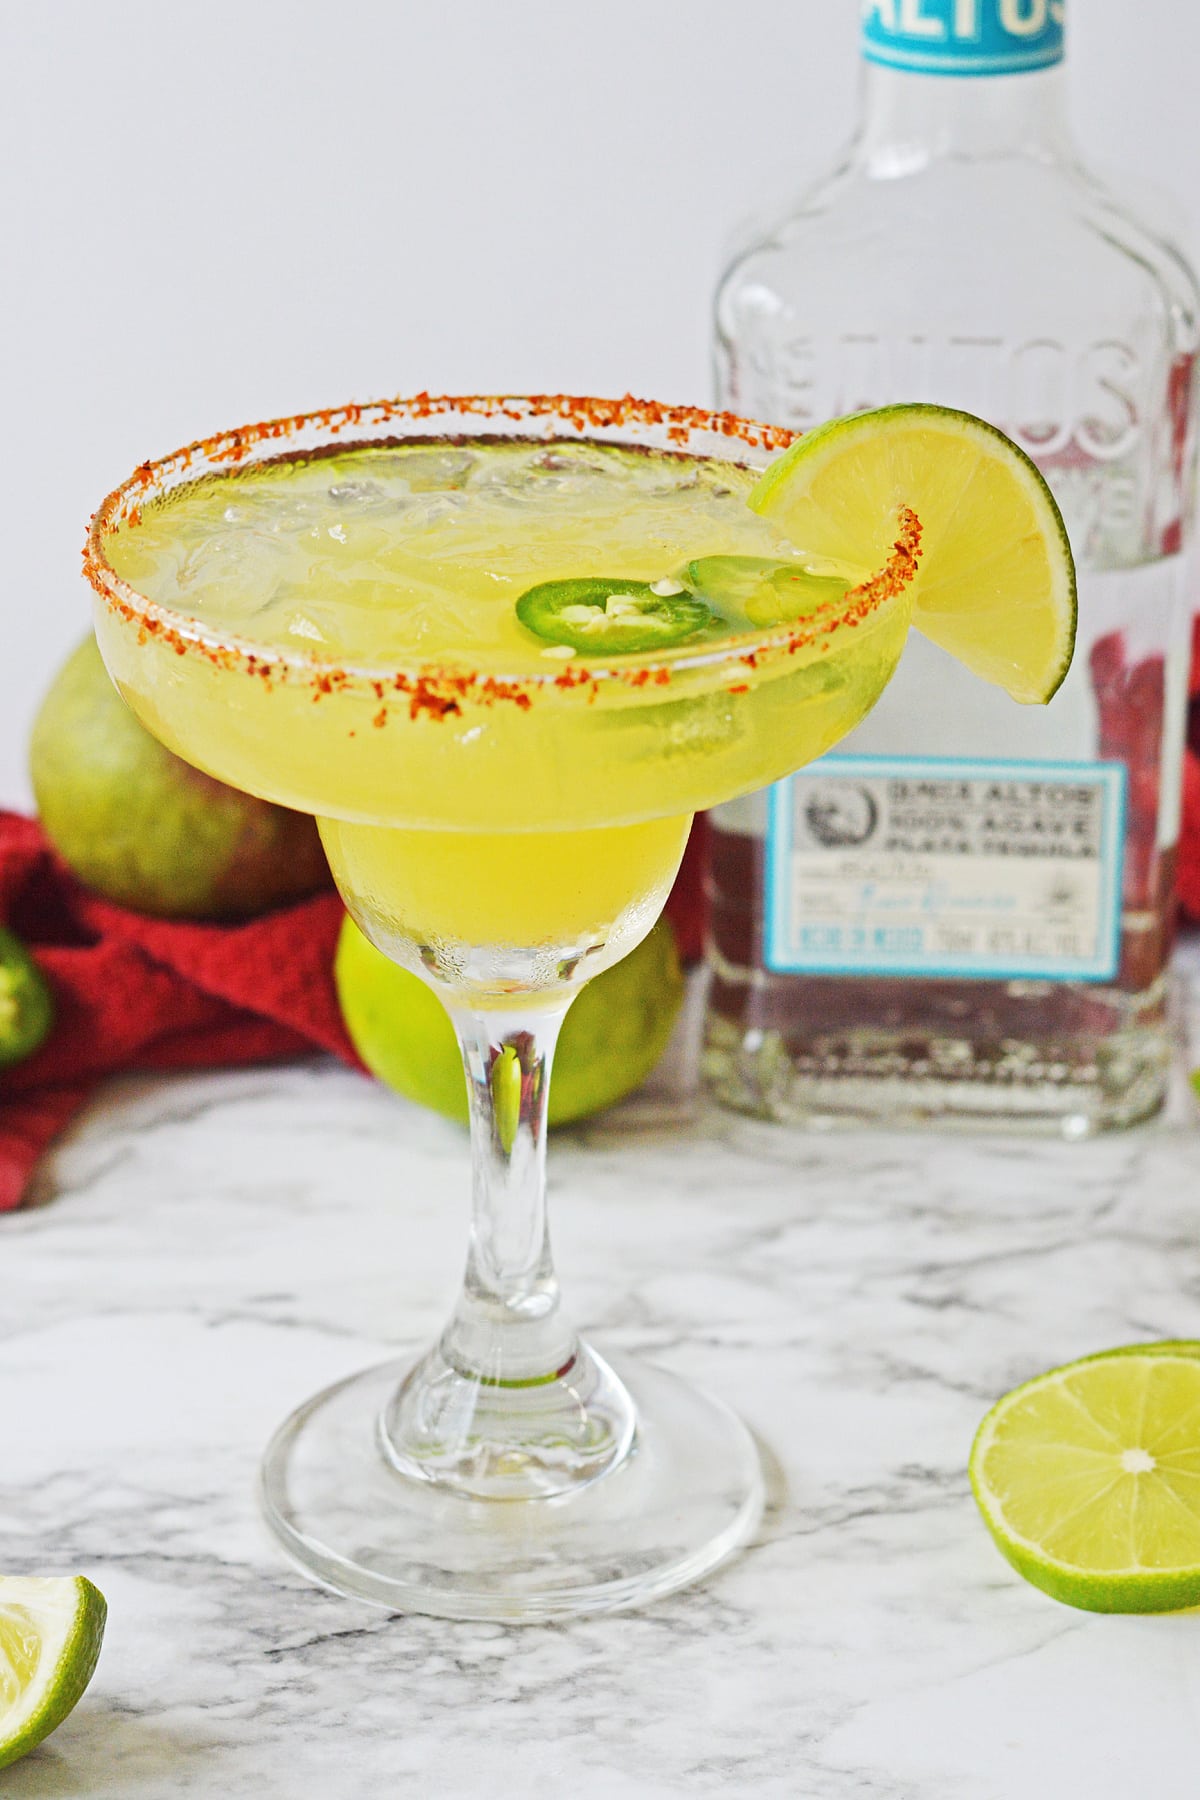 Spicy Mango Margarita with a lime wedge